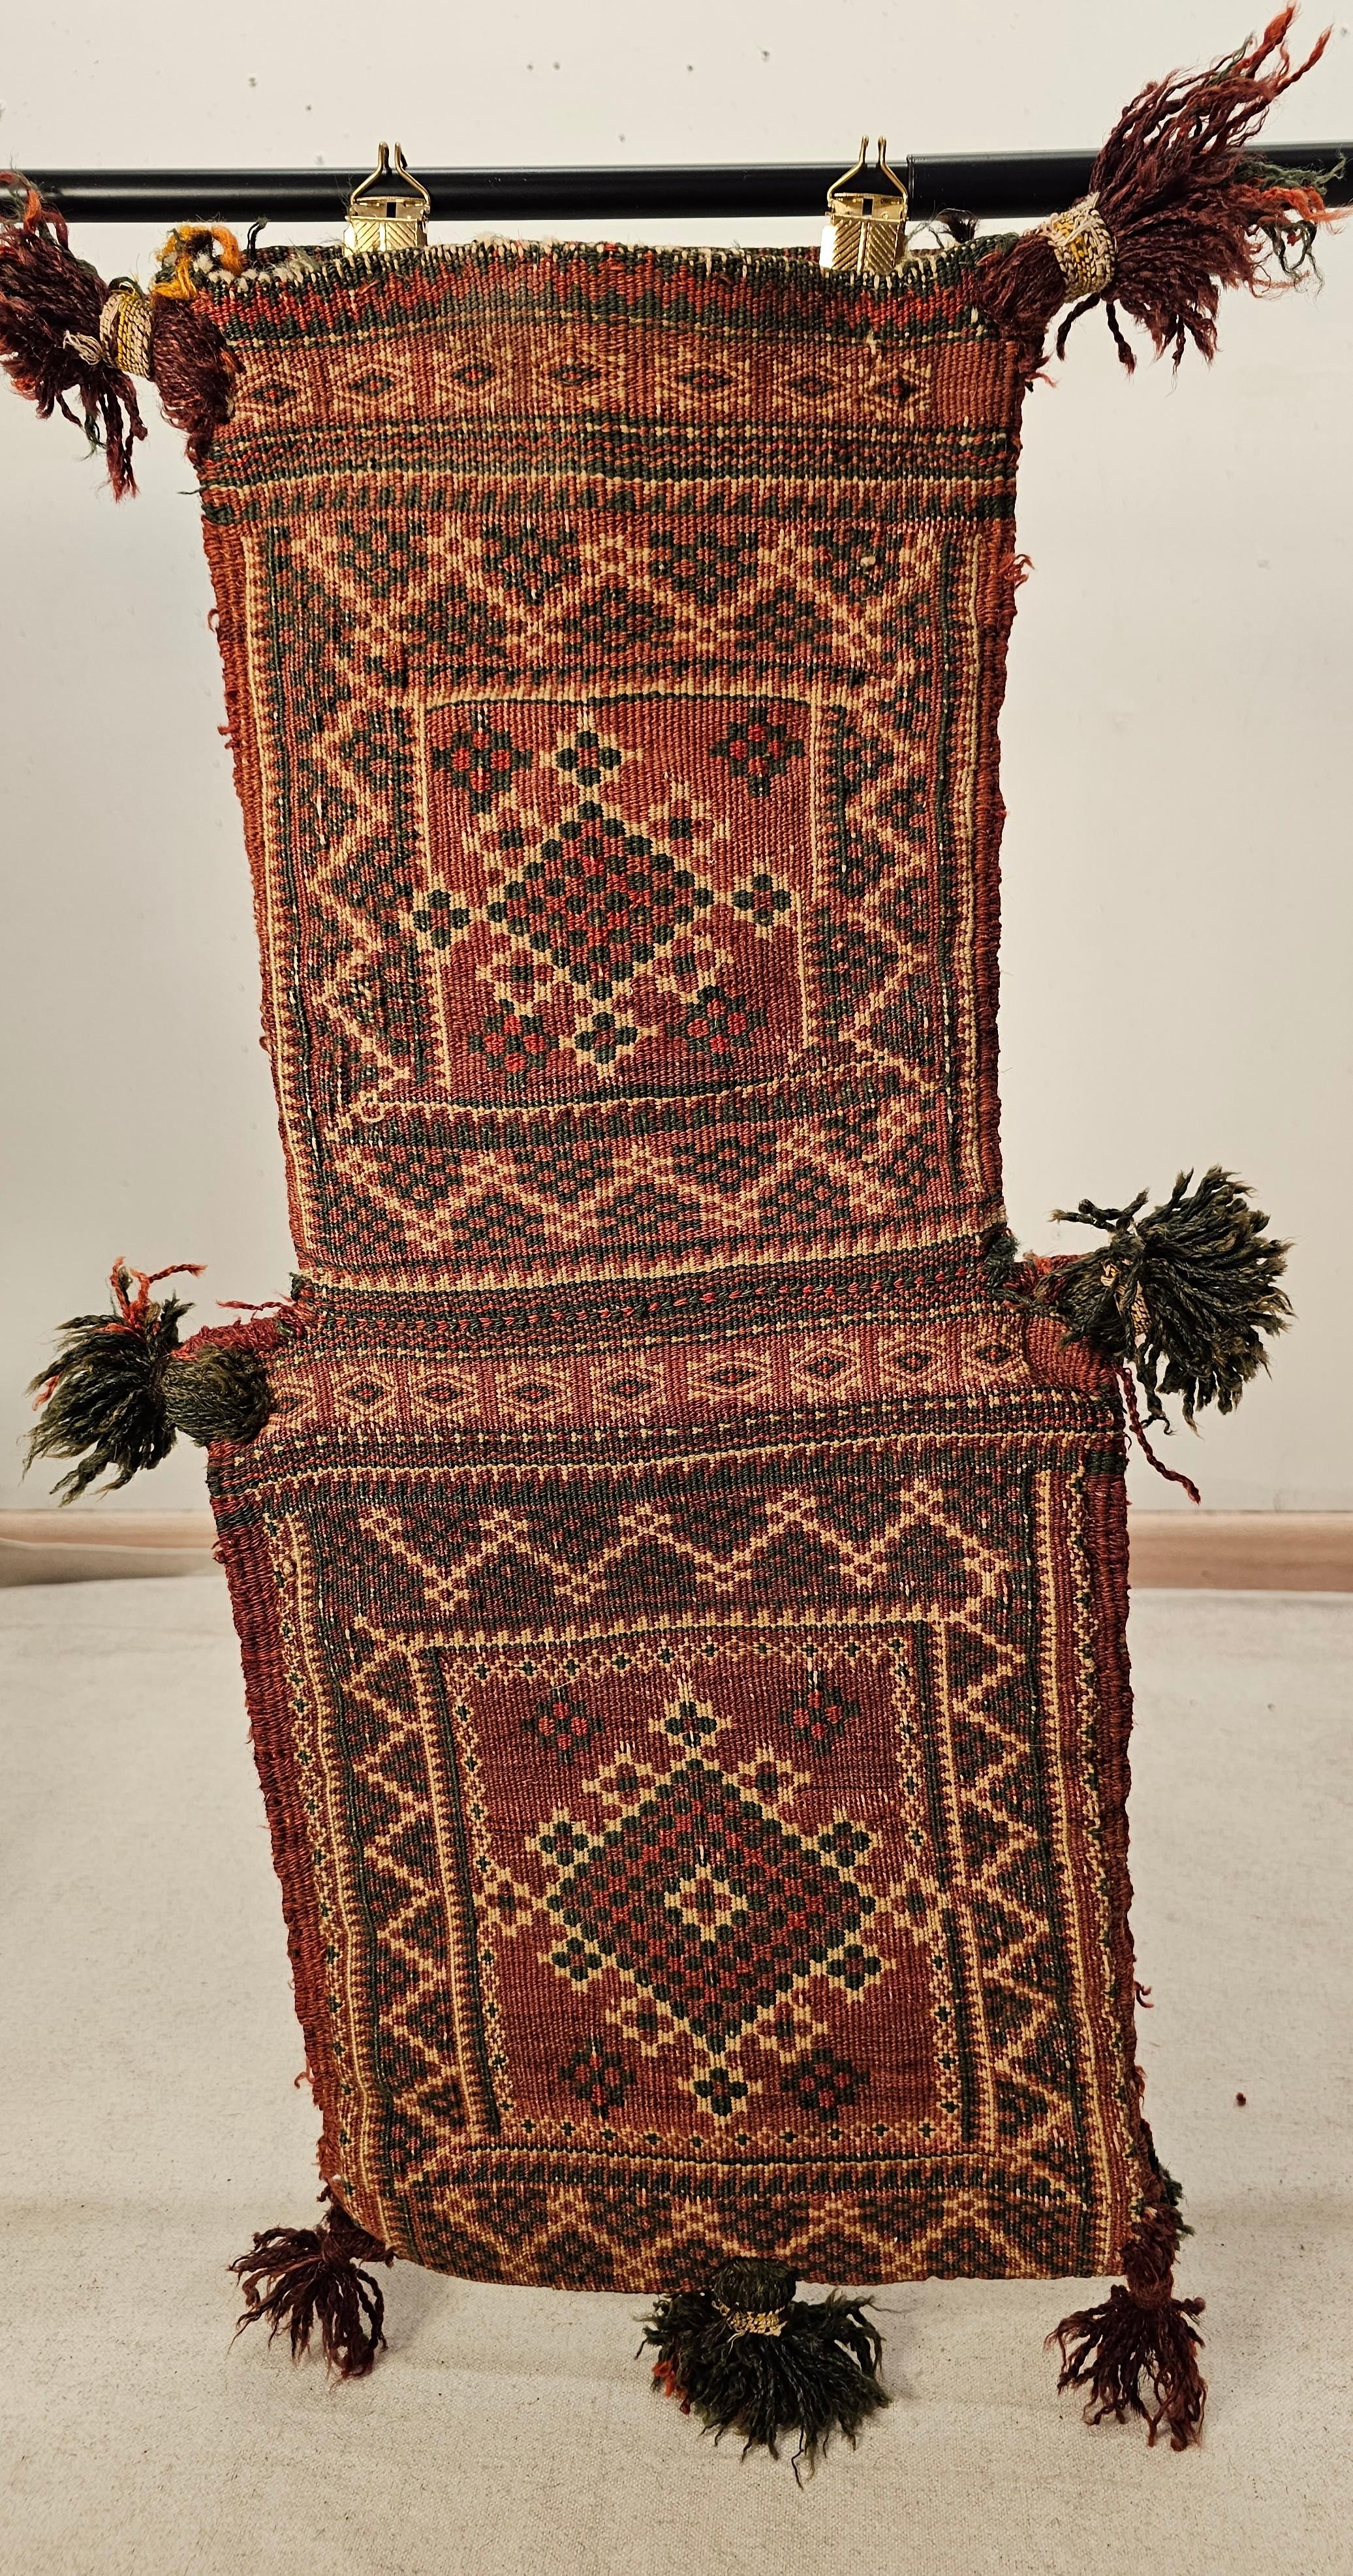 A vintage Baluch tribal salt bag with geometric pattern in green, red, ivory and brown colors from the early 1900s.  The salt bag has a small Baluch piled rug woven for the front and the back of the bag which is very unusual since most salt bags